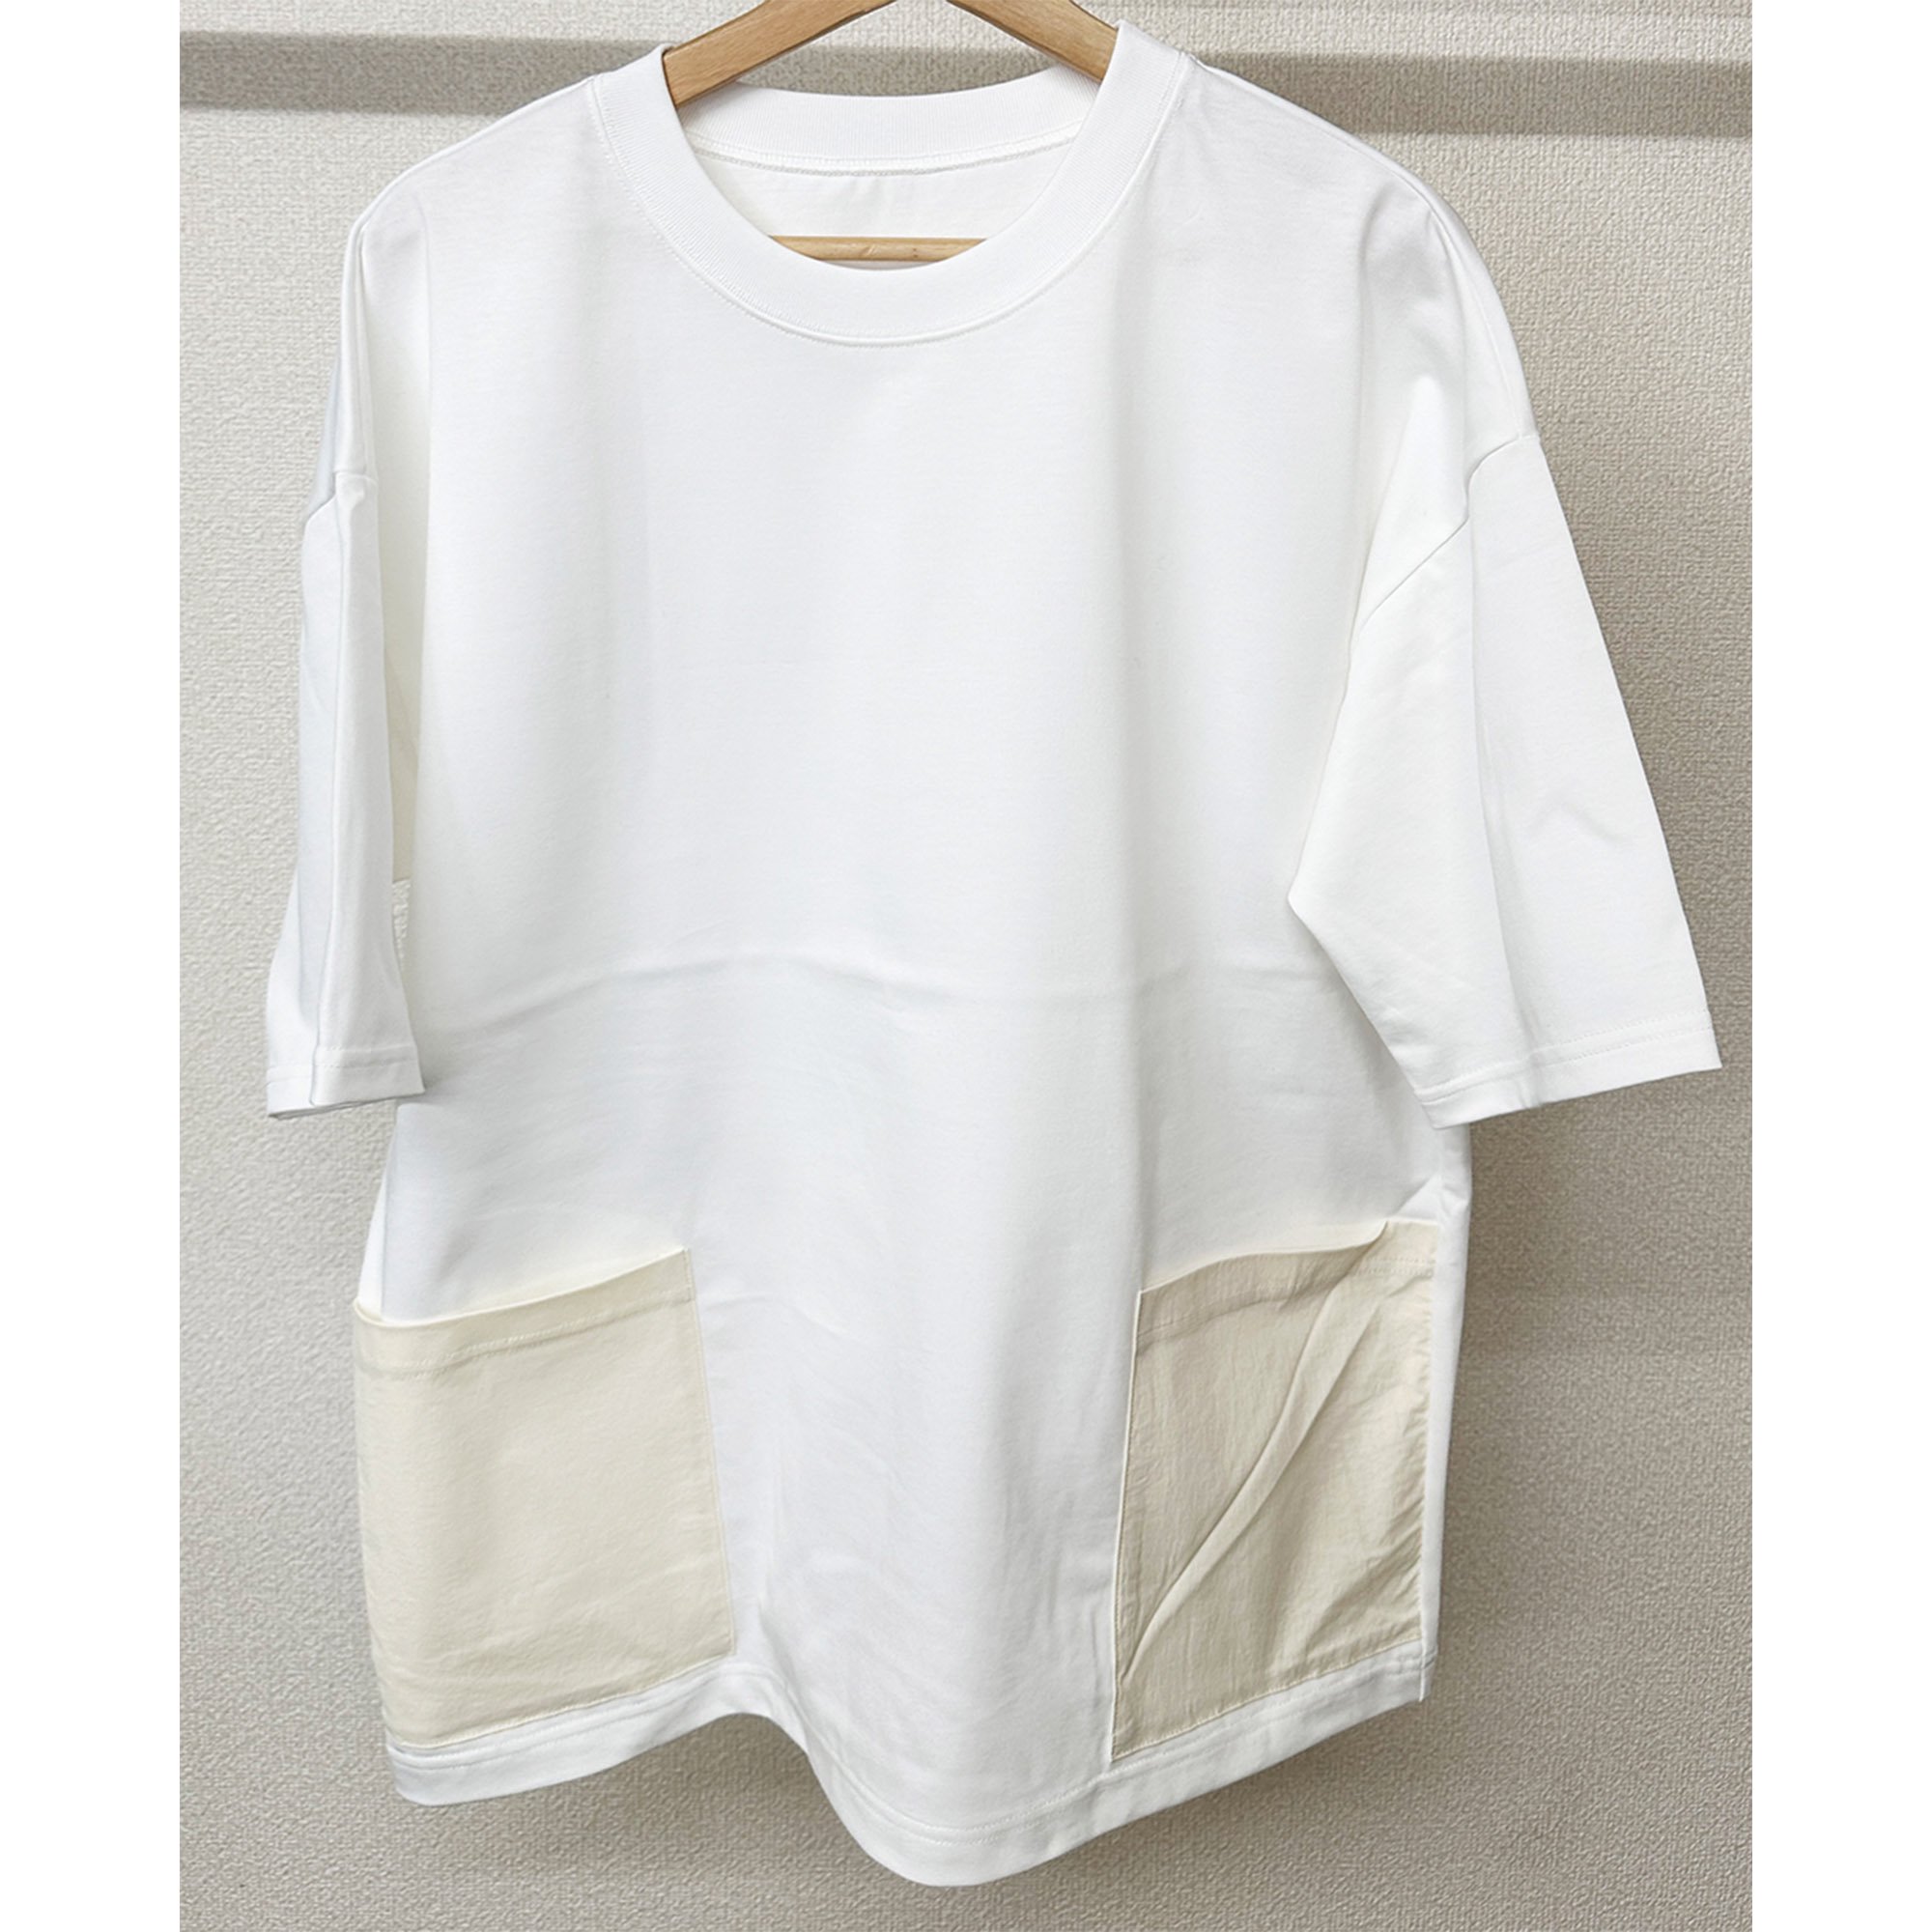 <img class='new_mark_img1' src='https://img.shop-pro.jp/img/new/icons1.gif' style='border:none;display:inline;margin:0px;padding:0px;width:auto;' />SIDE POCKET OVER TEE WHITE